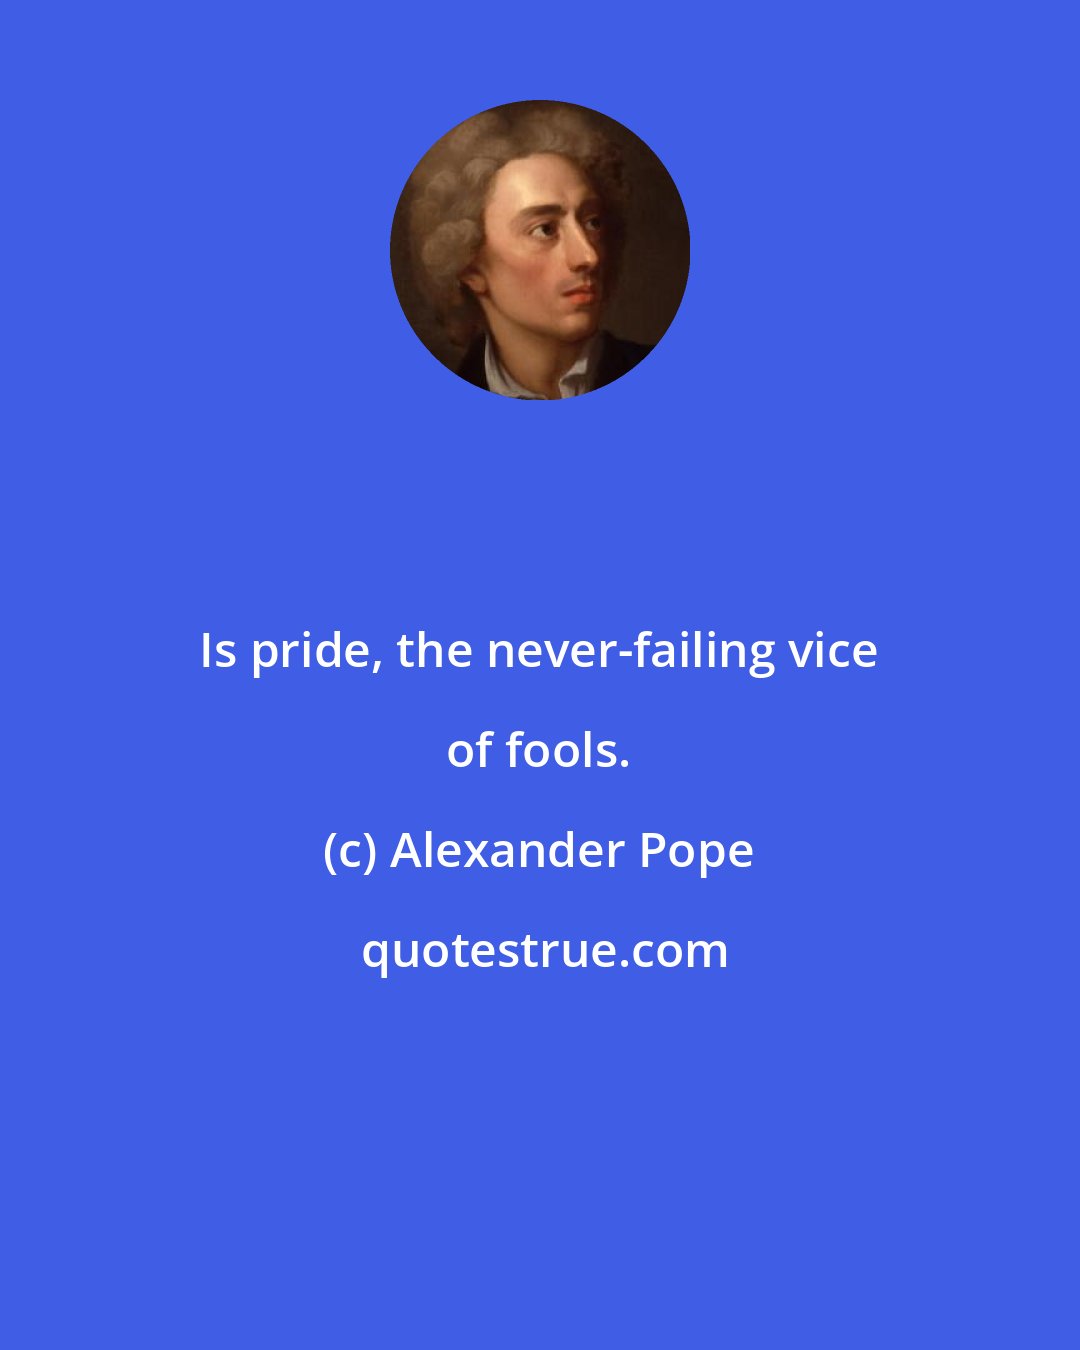 Alexander Pope: Is pride, the never-failing vice of fools.